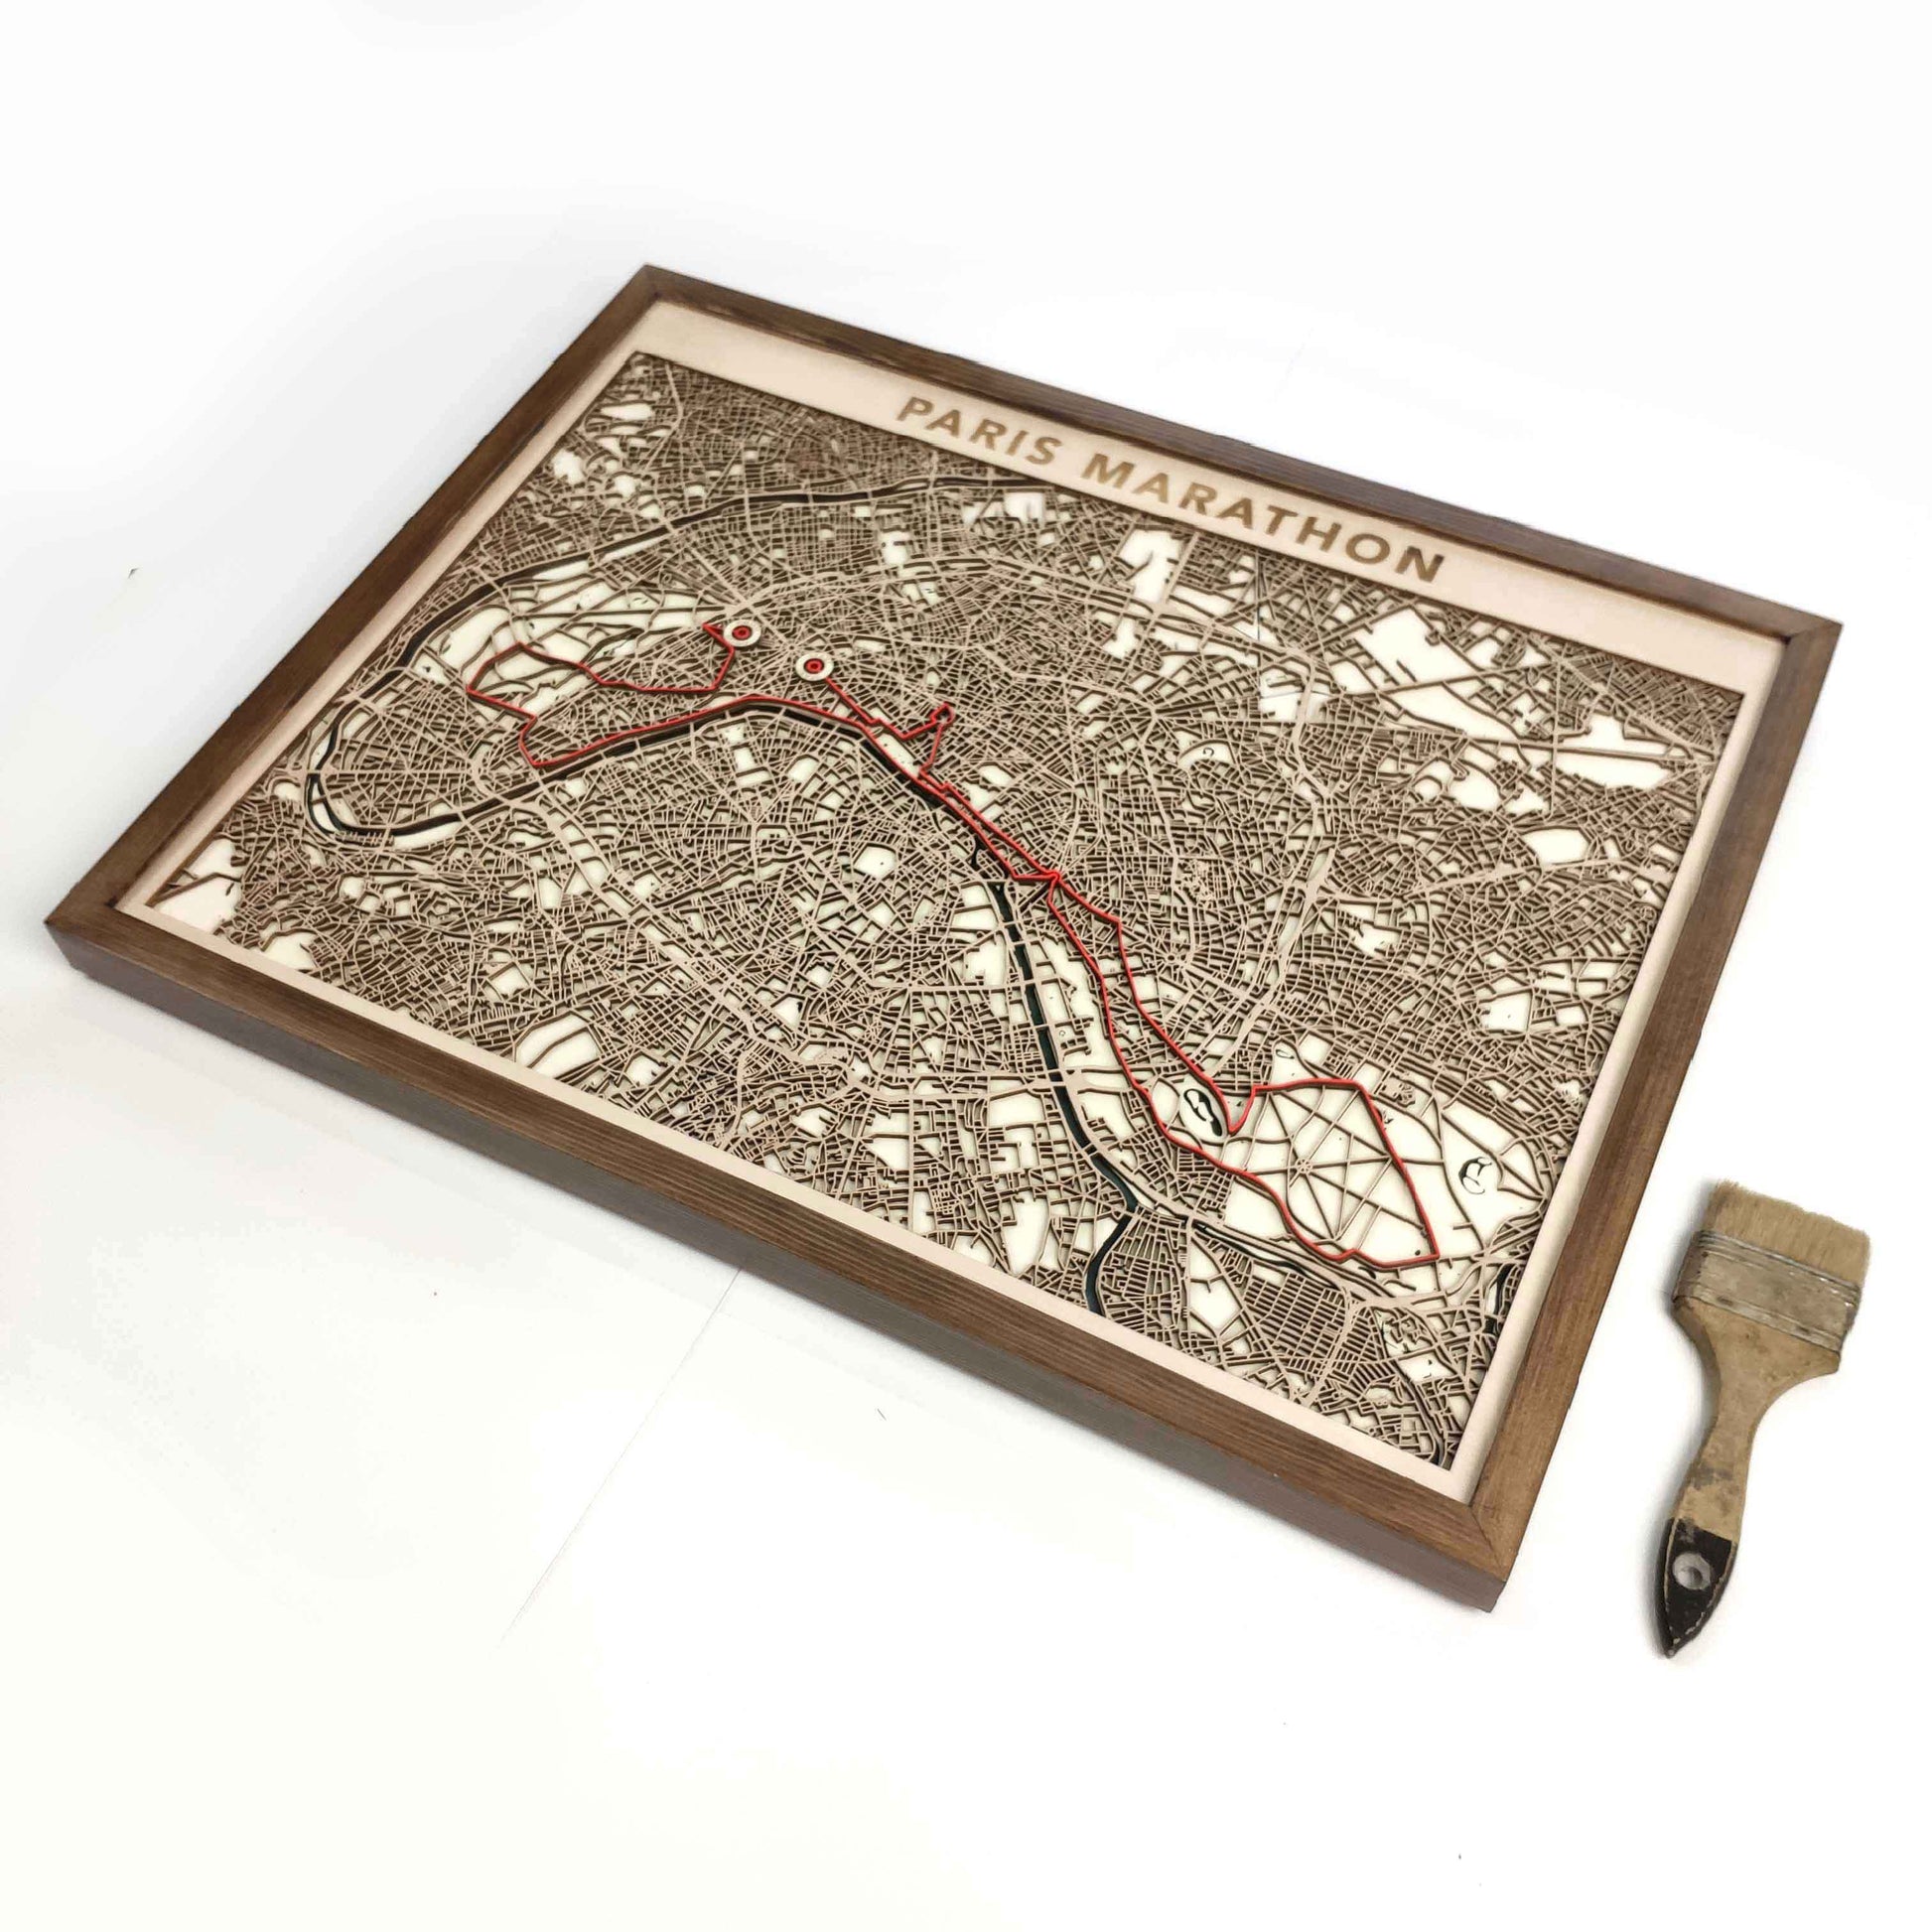 Paris Marathon Commemorative Wooden Route Map – Collector's Item by CityWood - Custom Wood Map Art - Unique Laser Cut Engraved - Anniversary Gift